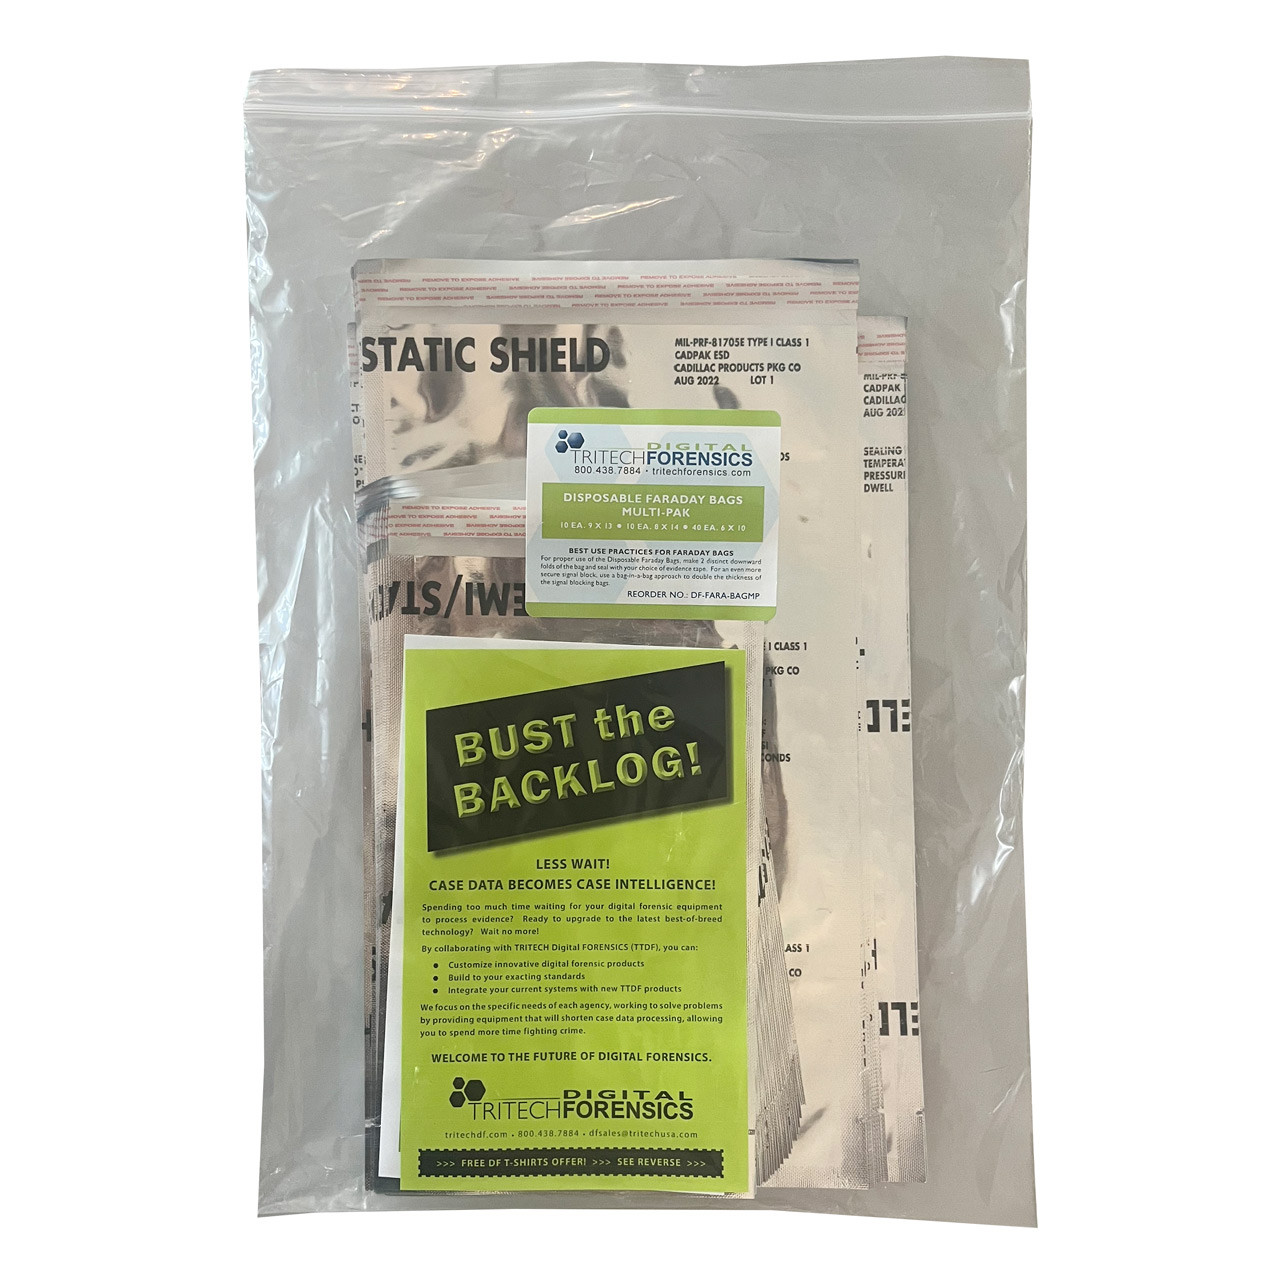 Stronghold Faraday bag Kit, 3 sizes from Sirchie